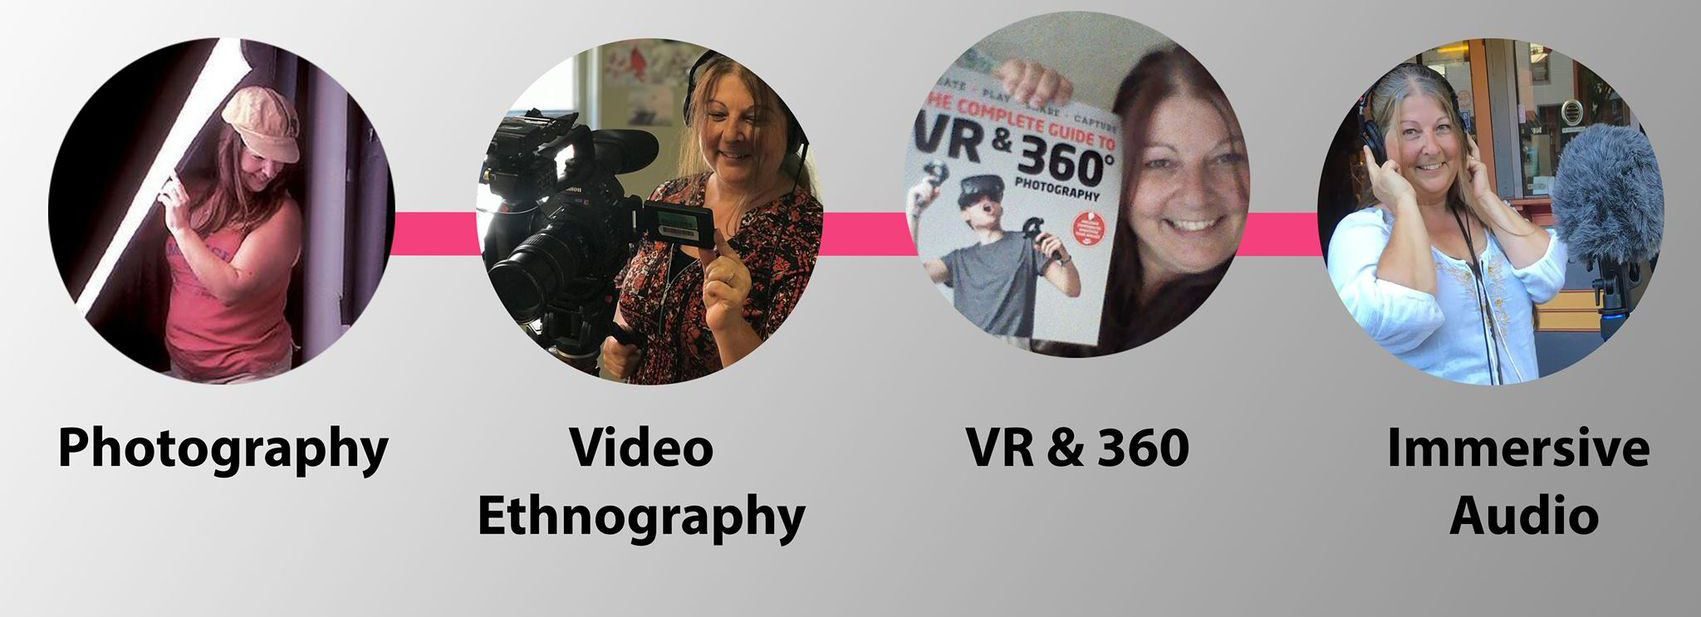 A banner showing Mary Anne at different stages of her media work with text under each image. Text from left to right: Photography, Video Ethnography, VR & 360 and Immersive Audio